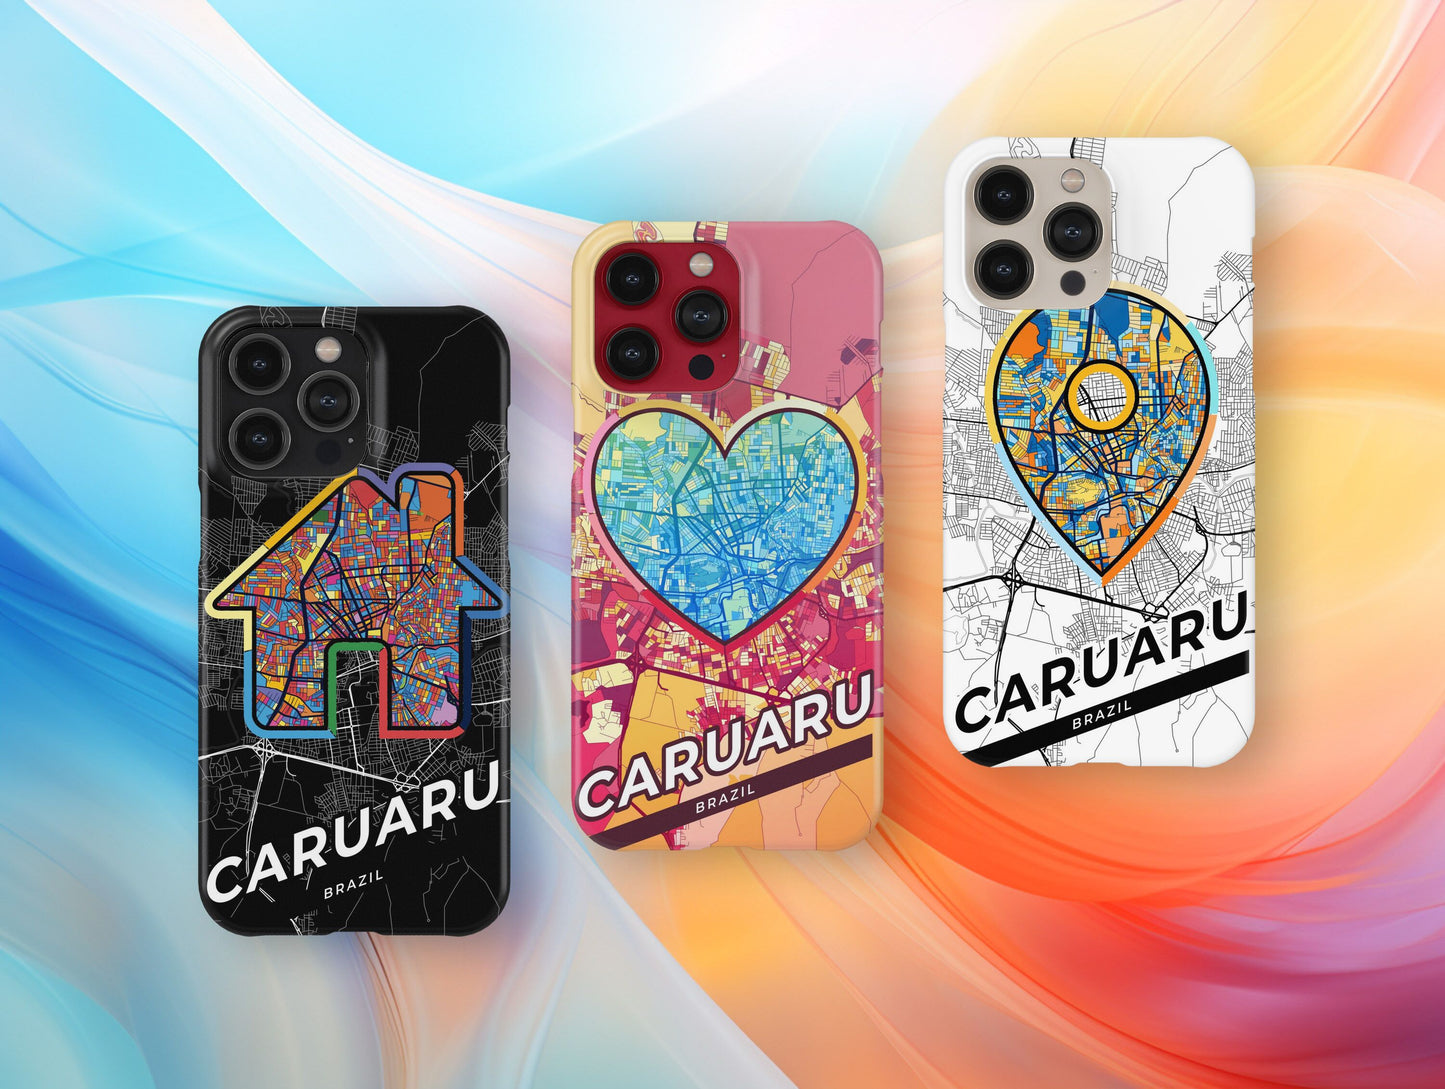 Caruaru Brazil slim phone case with colorful icon. Birthday, wedding or housewarming gift. Couple match cases.